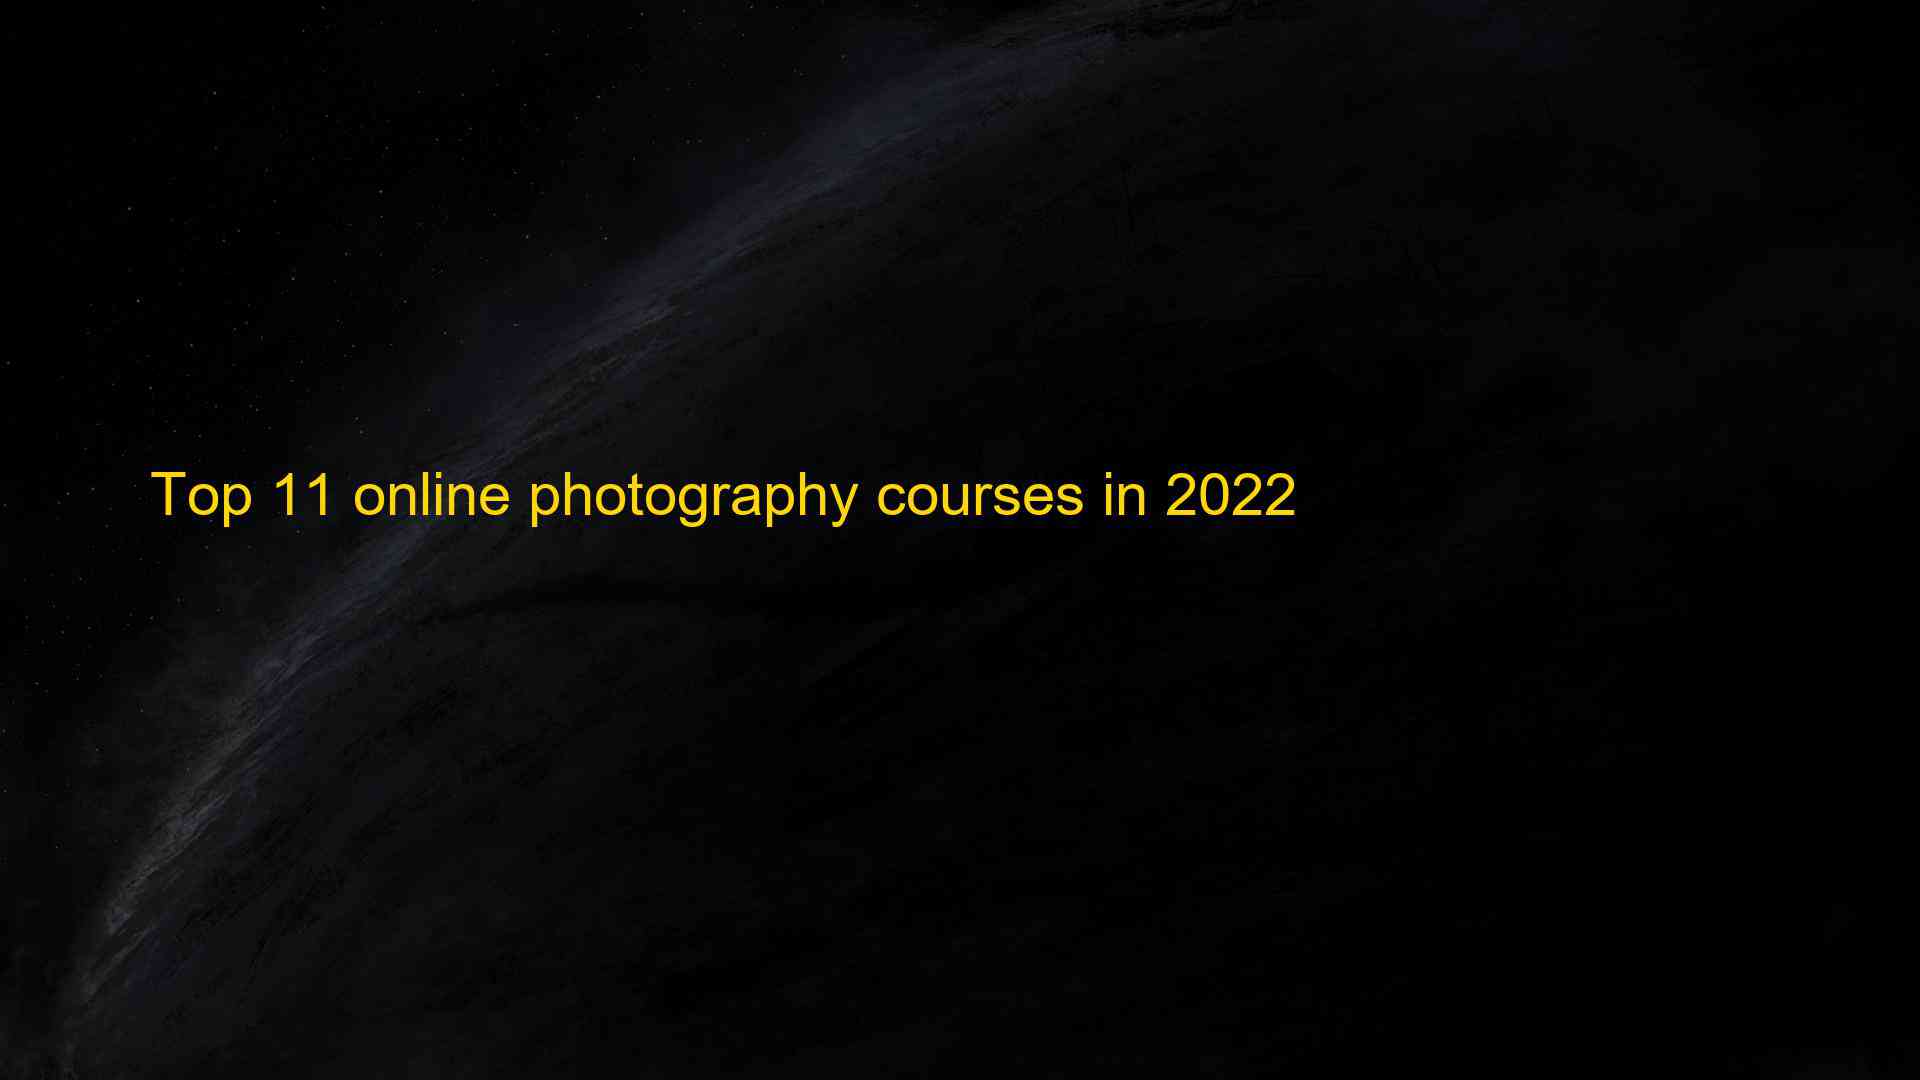 Top 11 online photography courses in 2022 1660912114